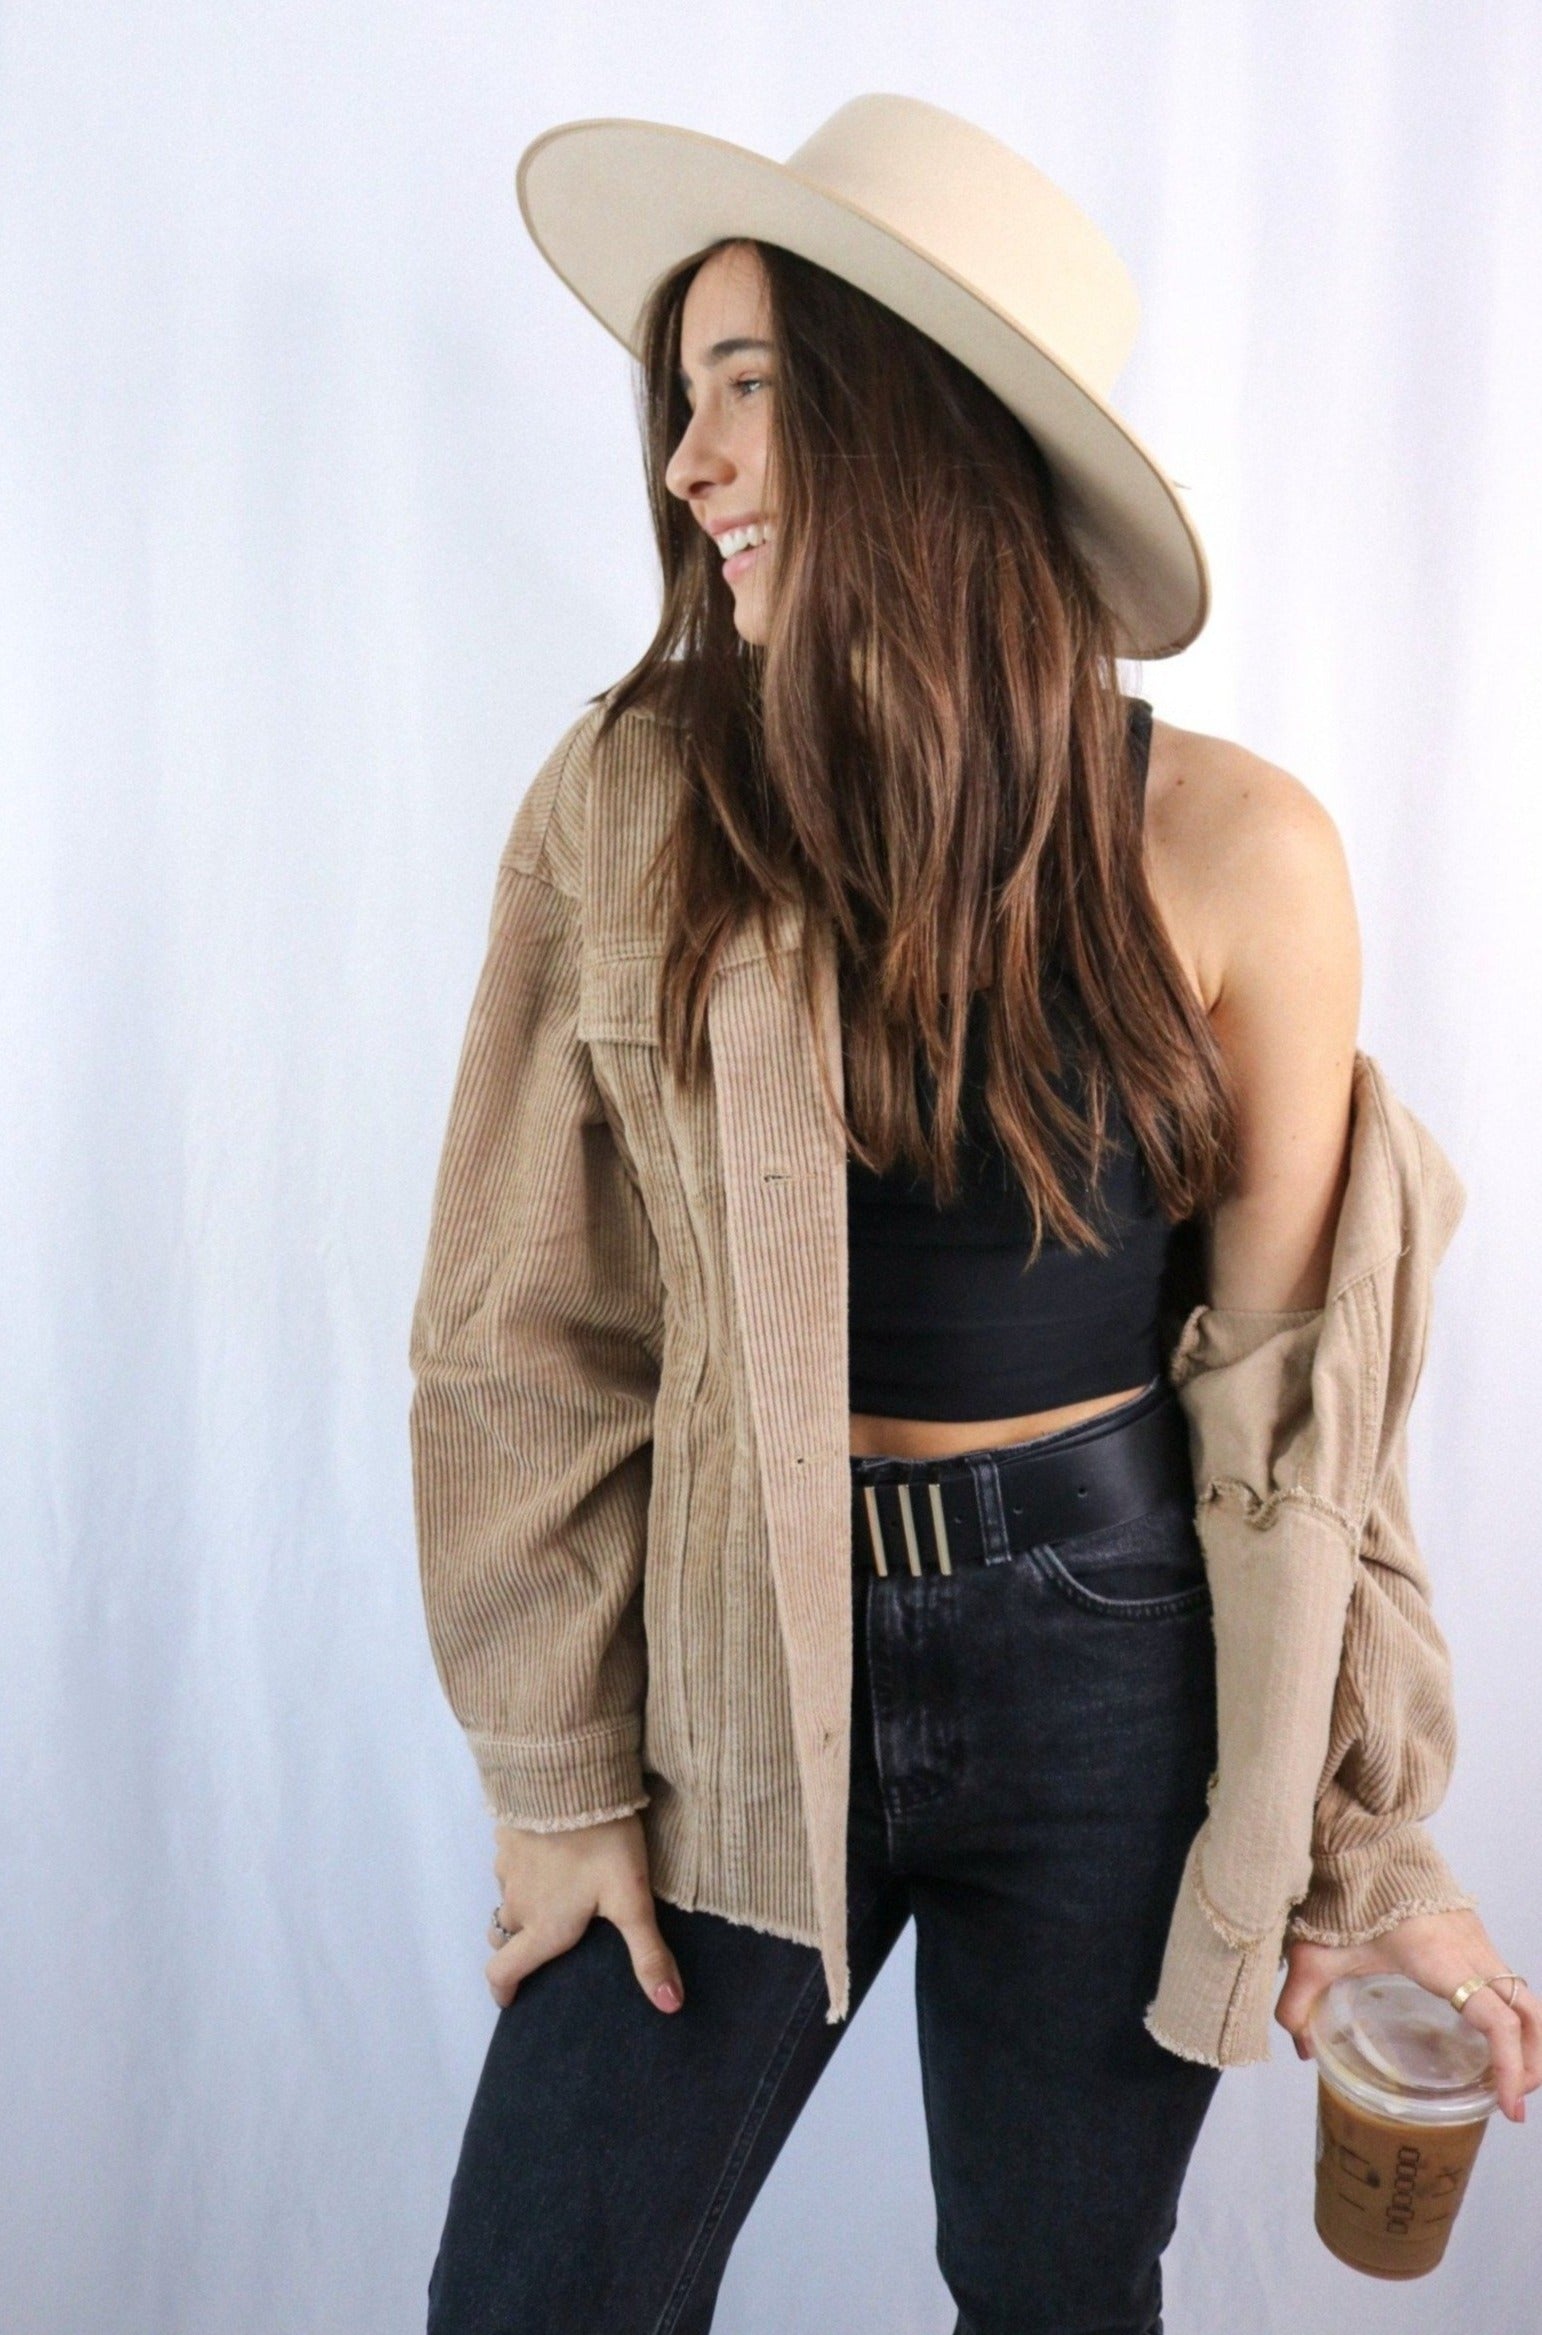 Brunette girl models buttoned corduroy jacket in the color tan for Scarlette The Label, an online fashion boutique for women. The corduroy jacket is an oversized street style jacket. Paired with a black crop top, dark denim jeans, and a wide-brimmed rancher hat.